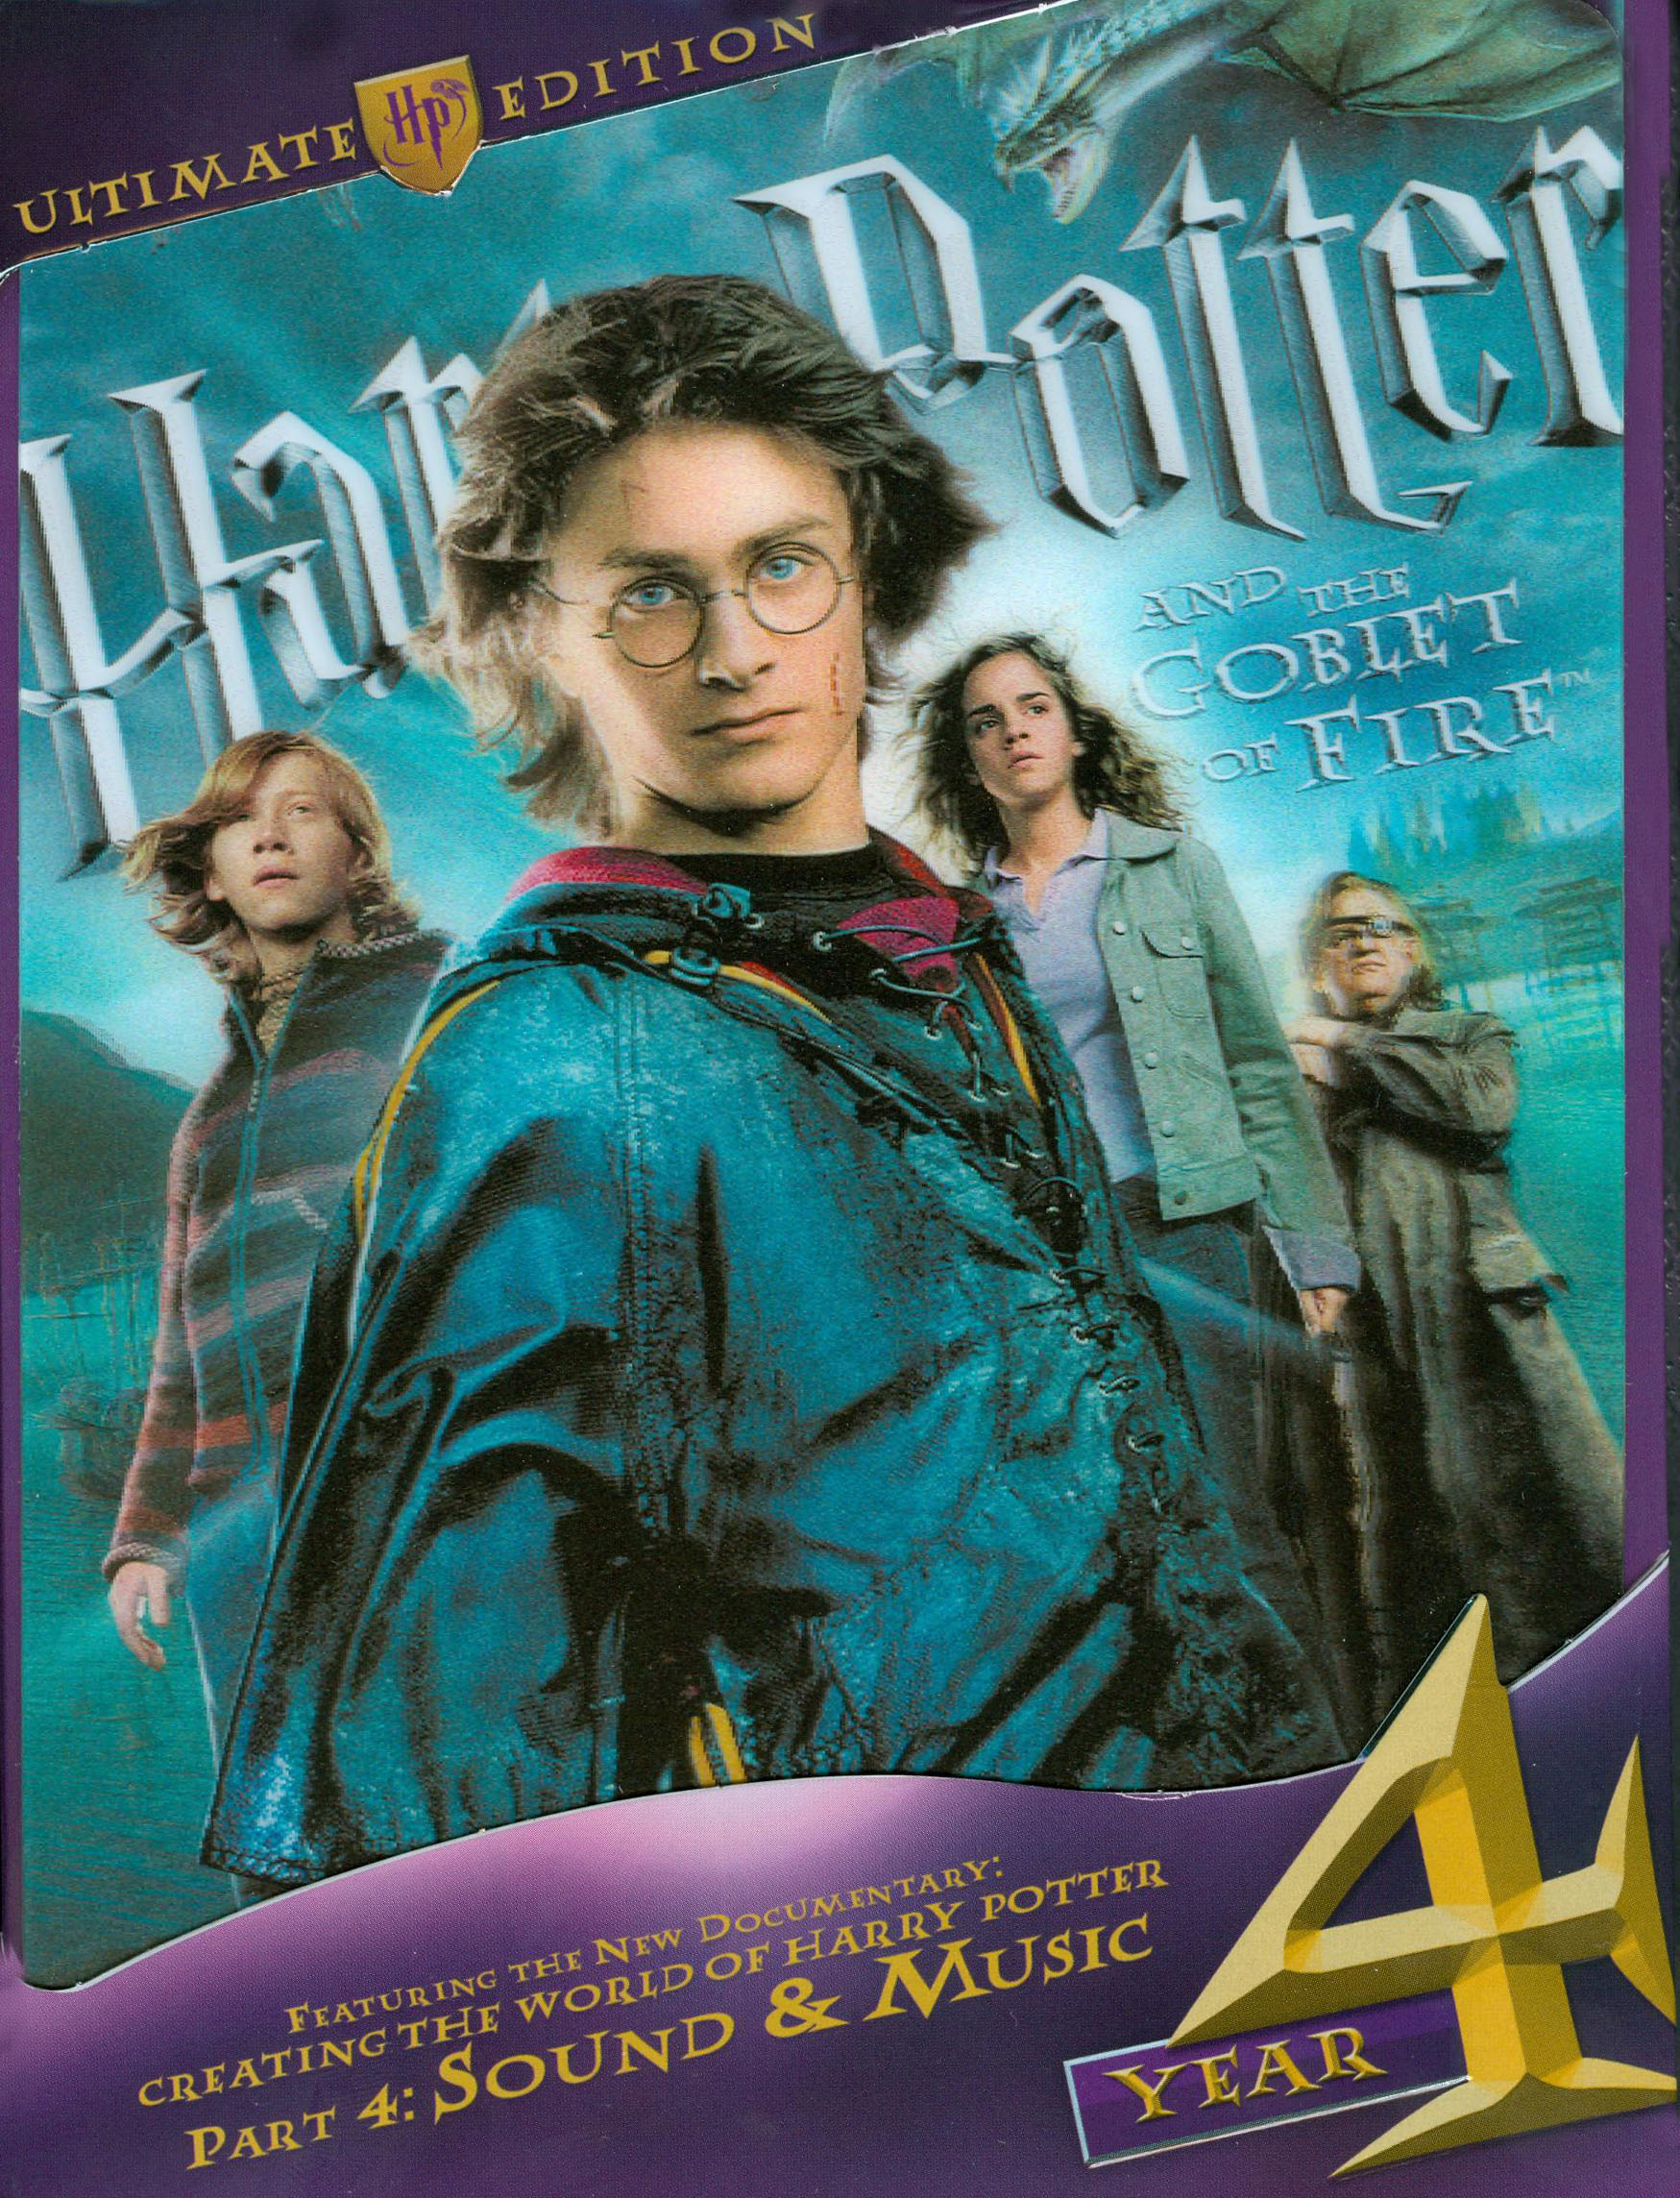 Harry Potter and the Goblet of Fire [2 Discs] [DVD] [2005] - Best Buy